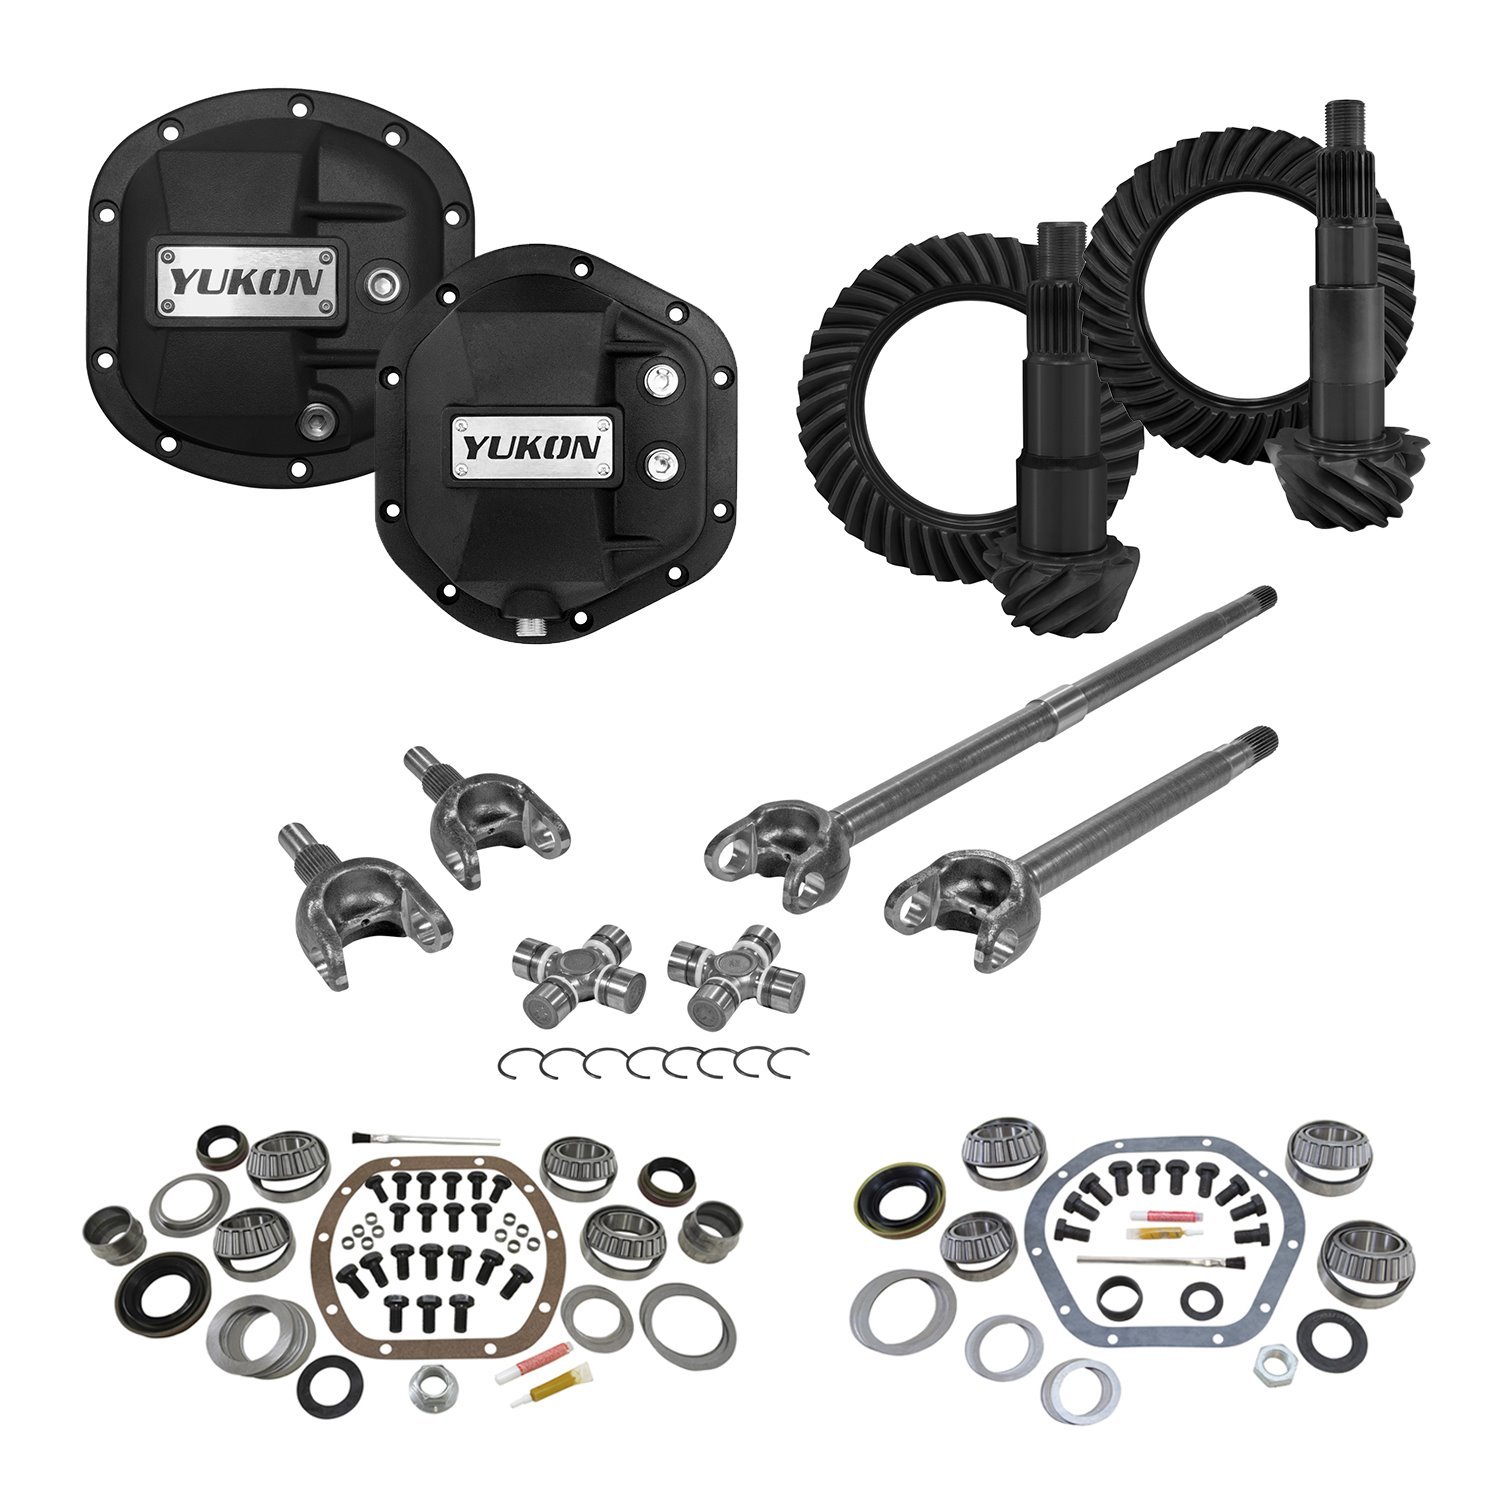 Stage 3 Jeep Jk Re-Gear Kit W/Covers, Front